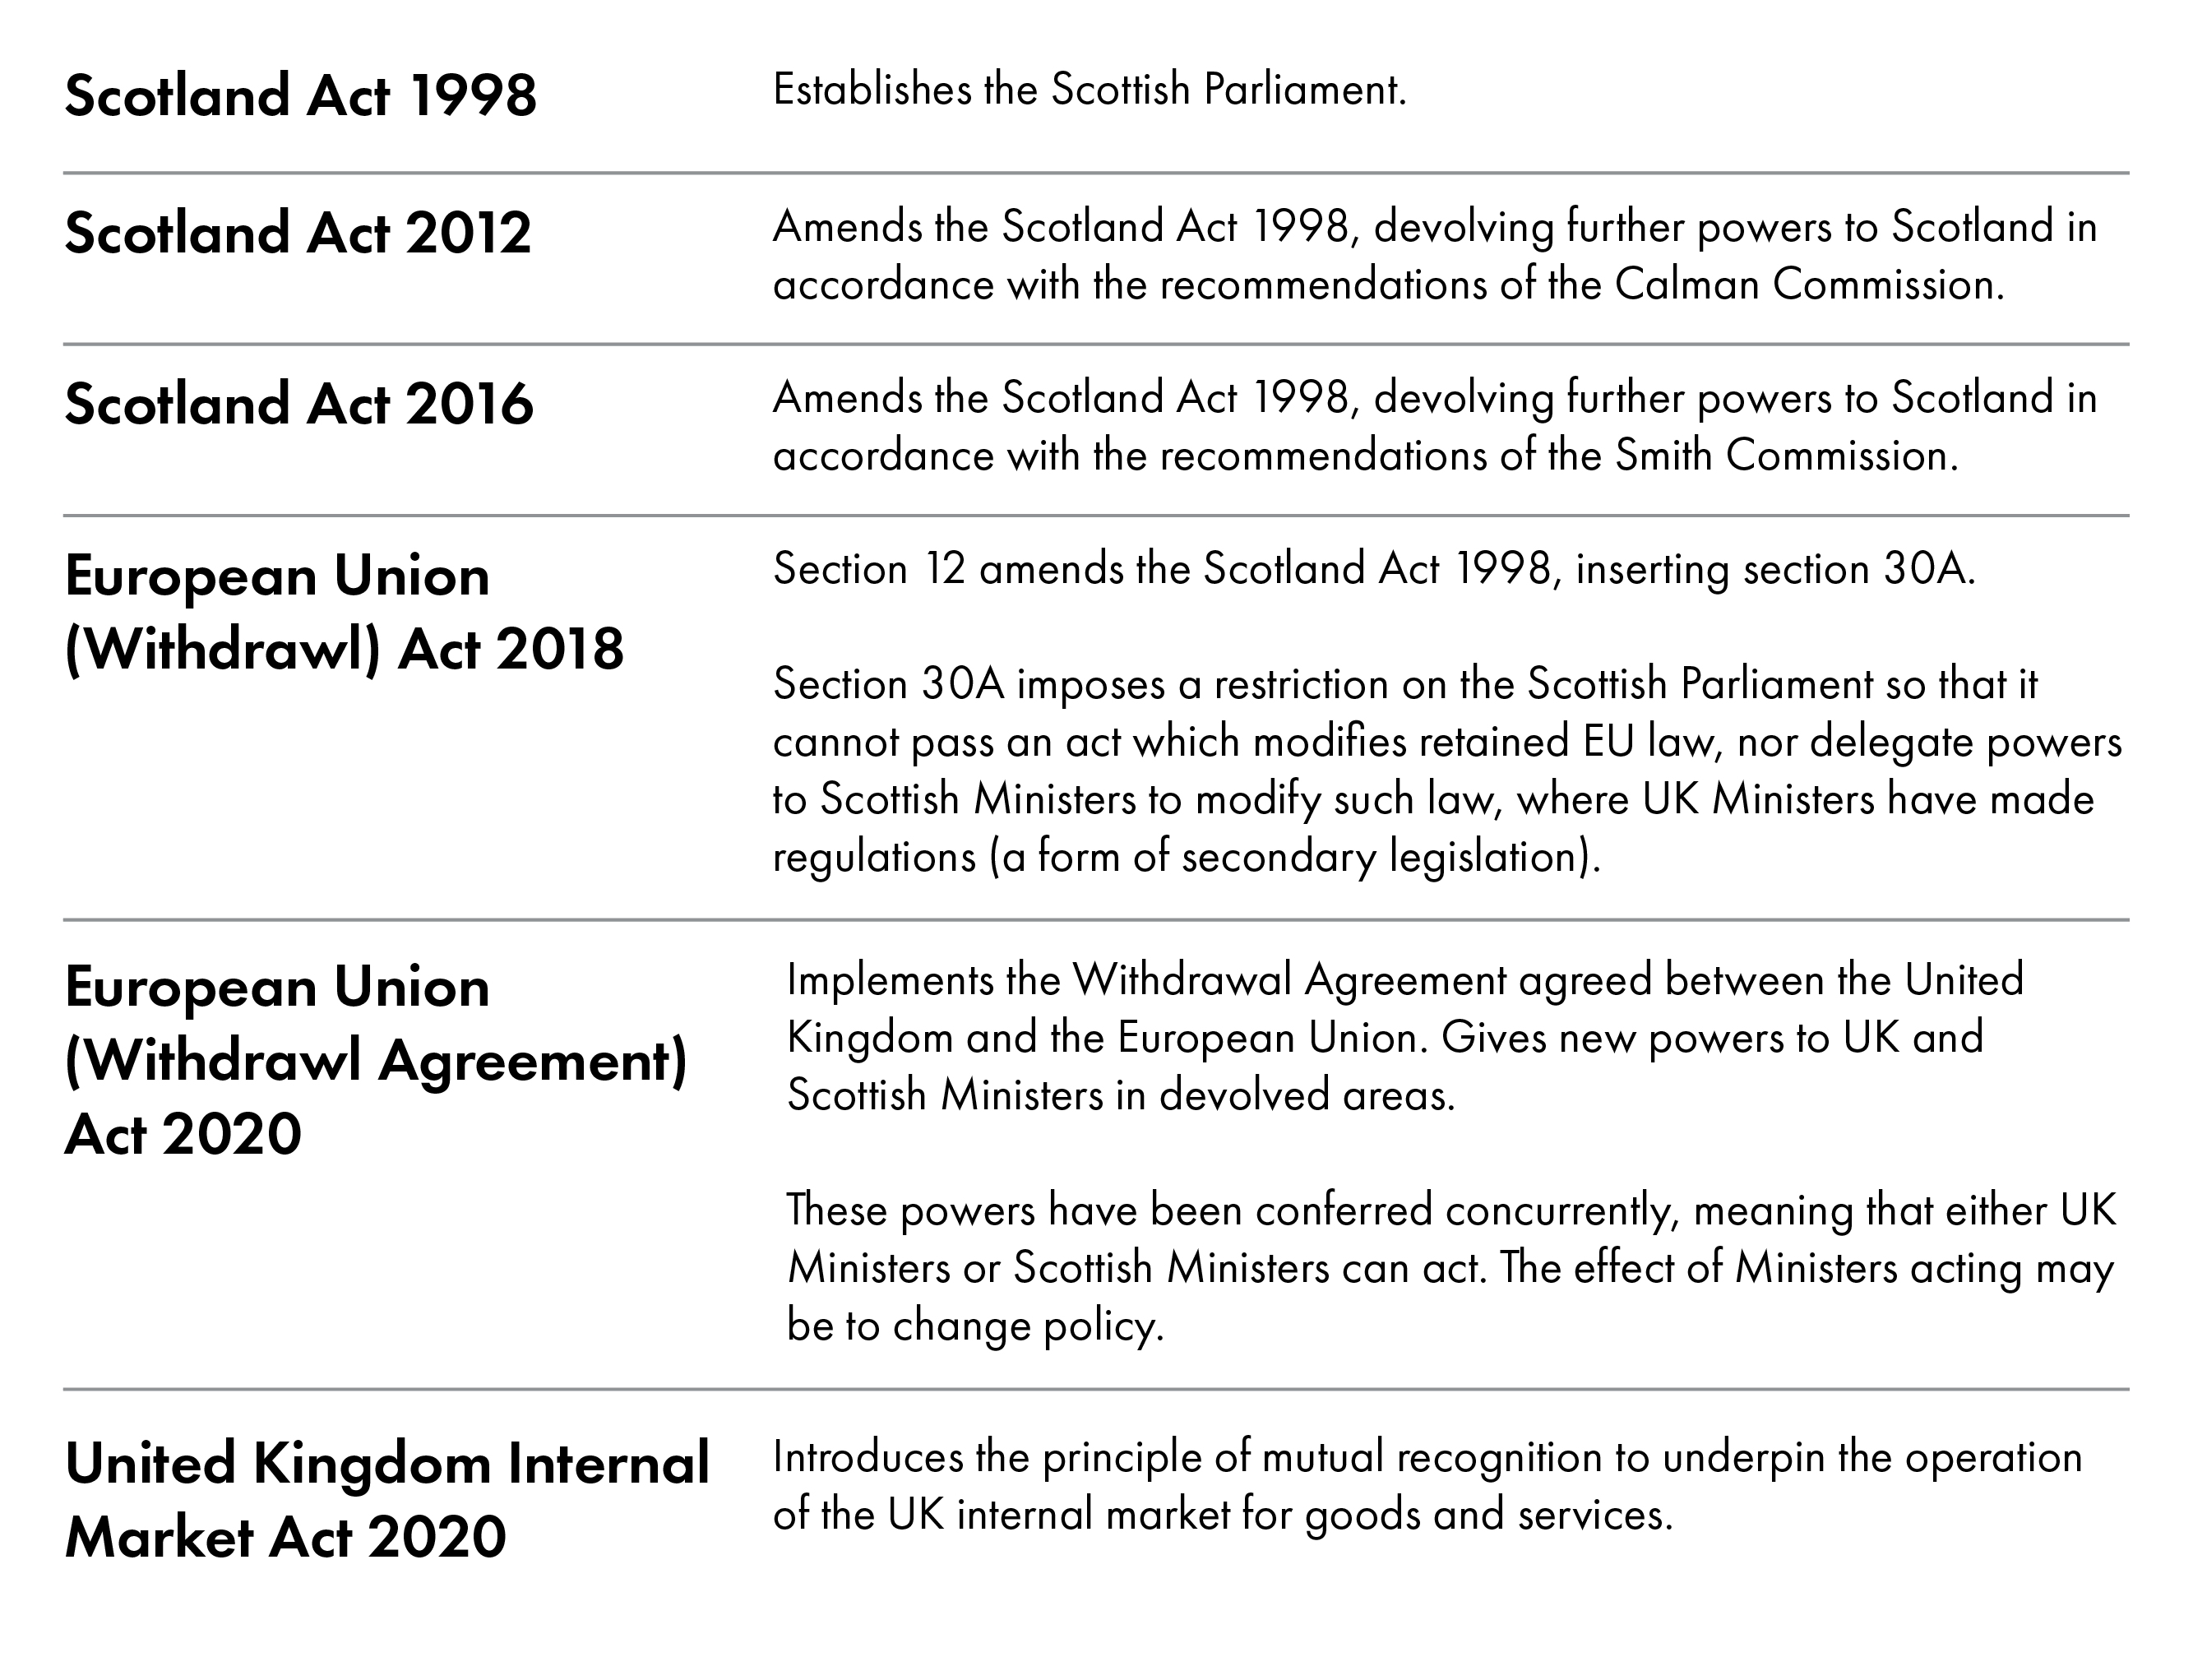 This chart shows the legislation which is central to understanding devoution in Scotland.